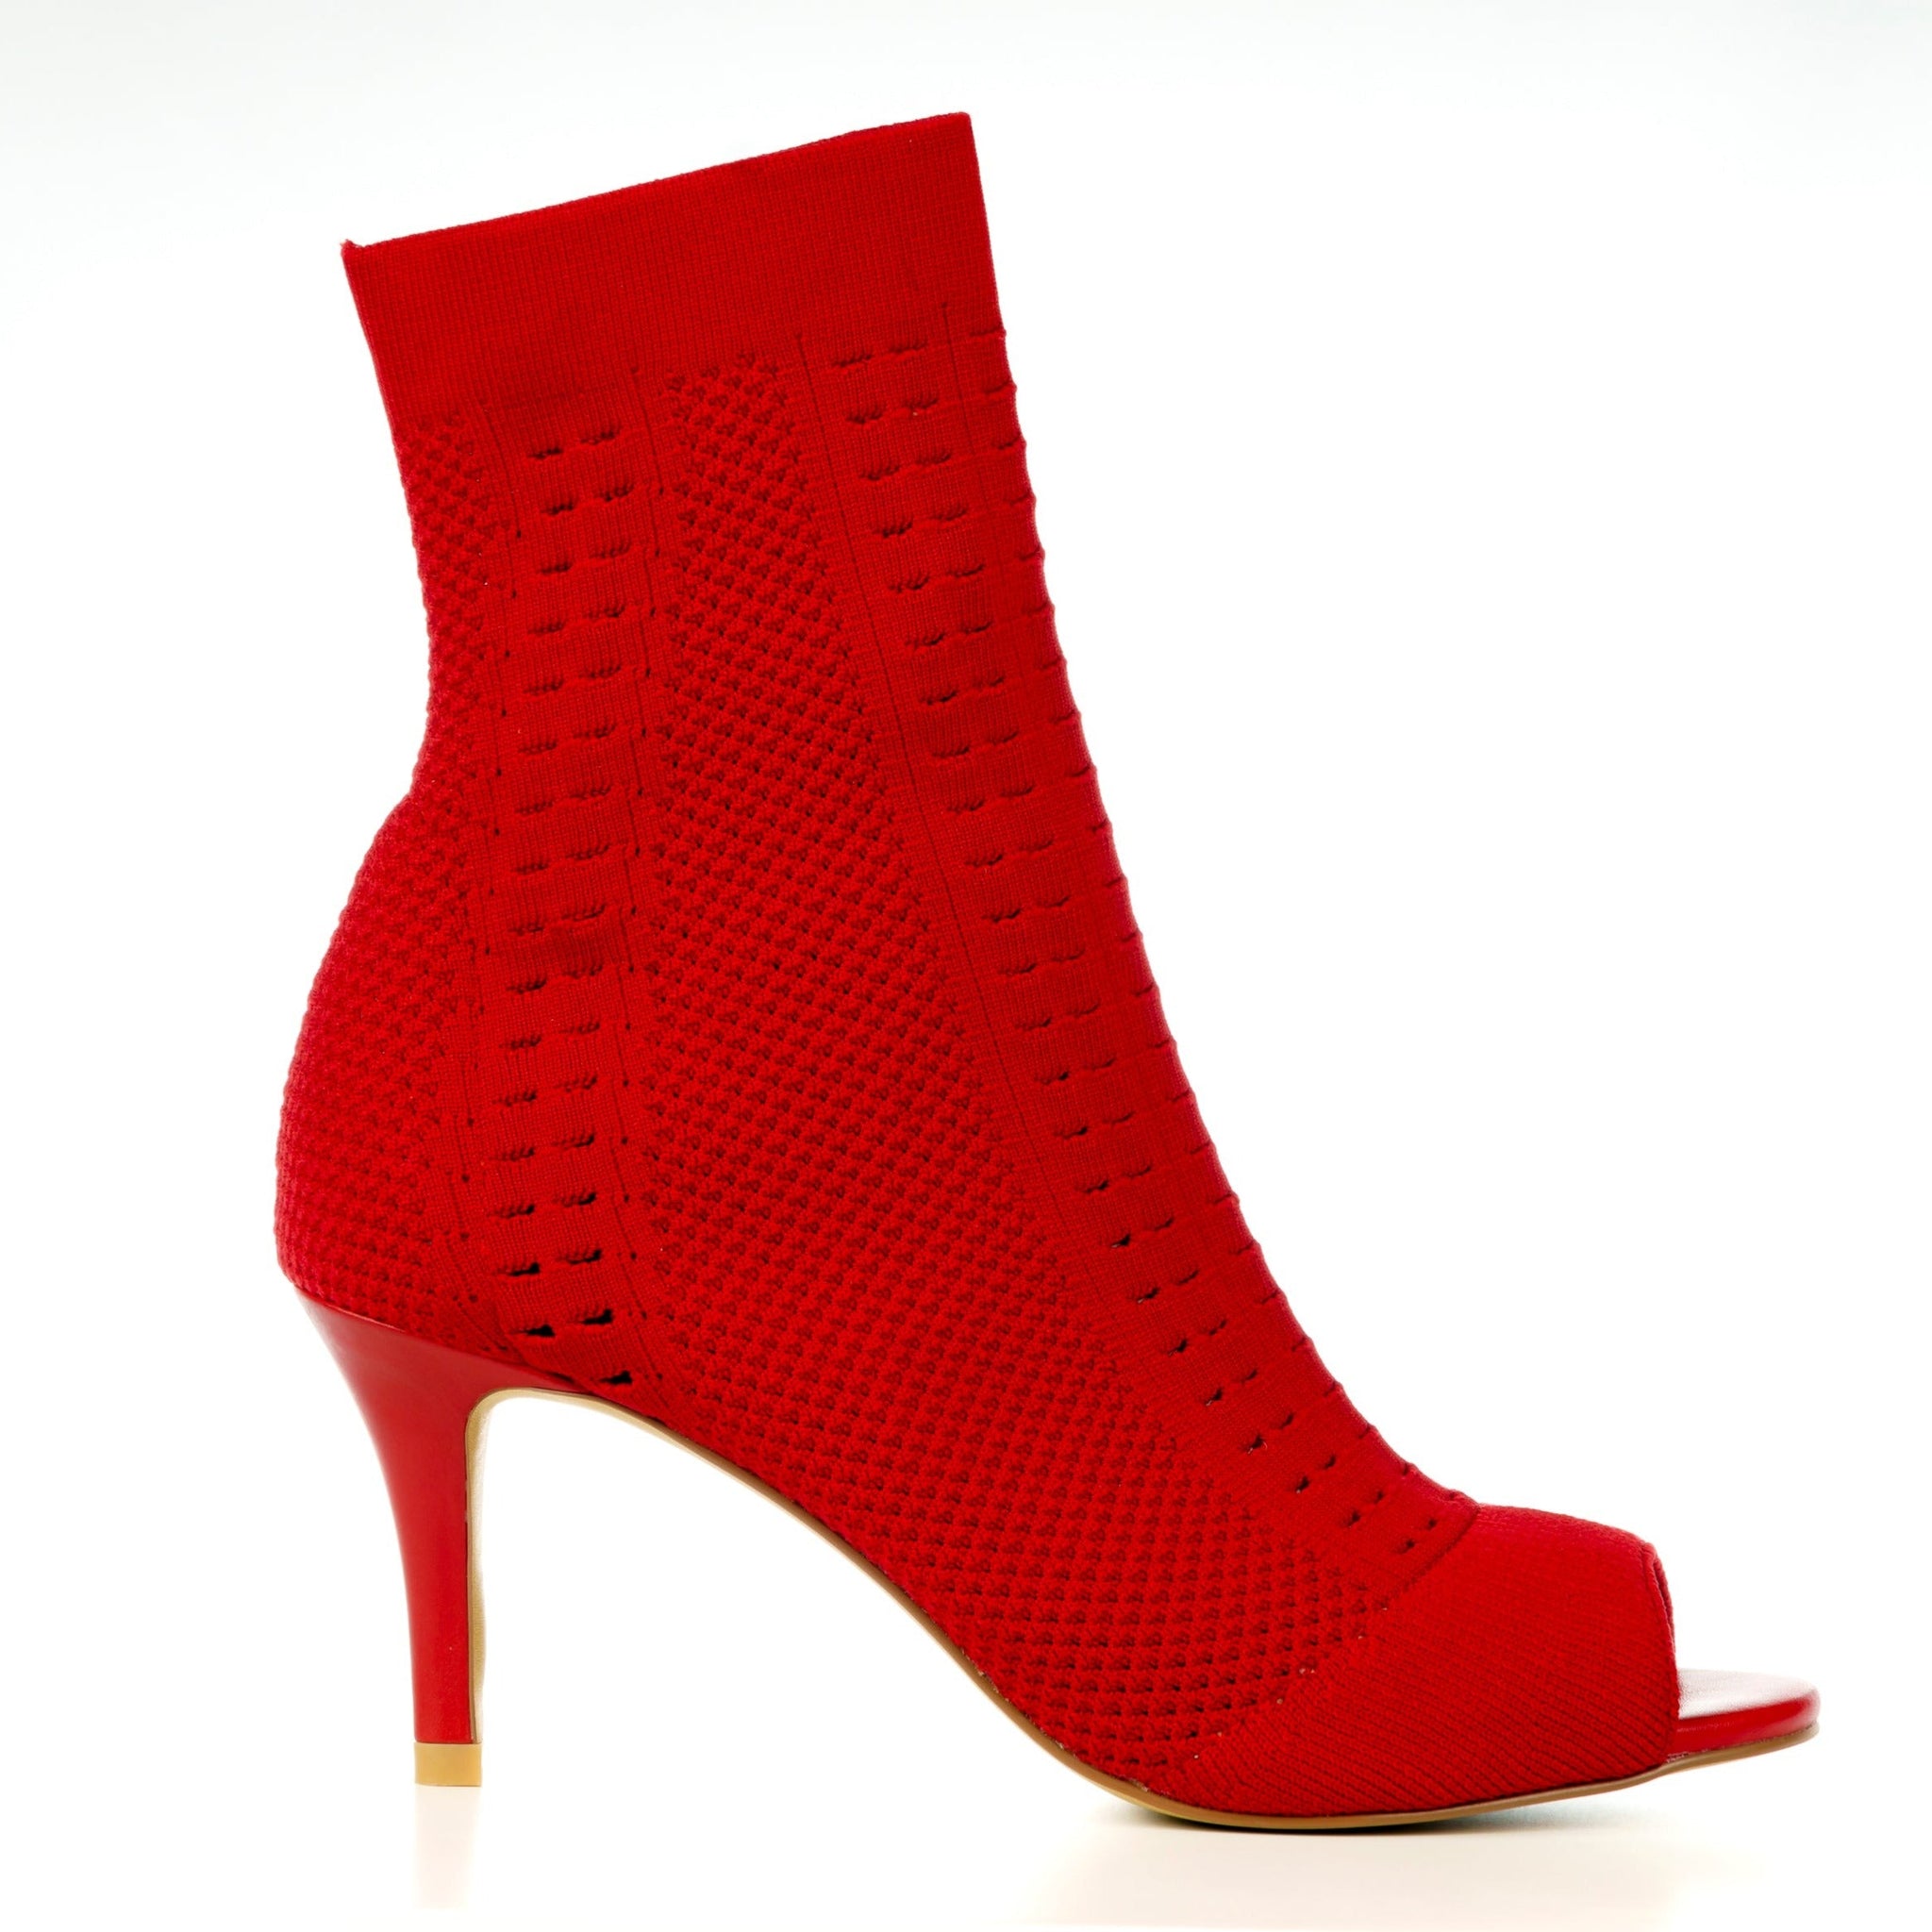 LINA bootie in red knit by Allegra James